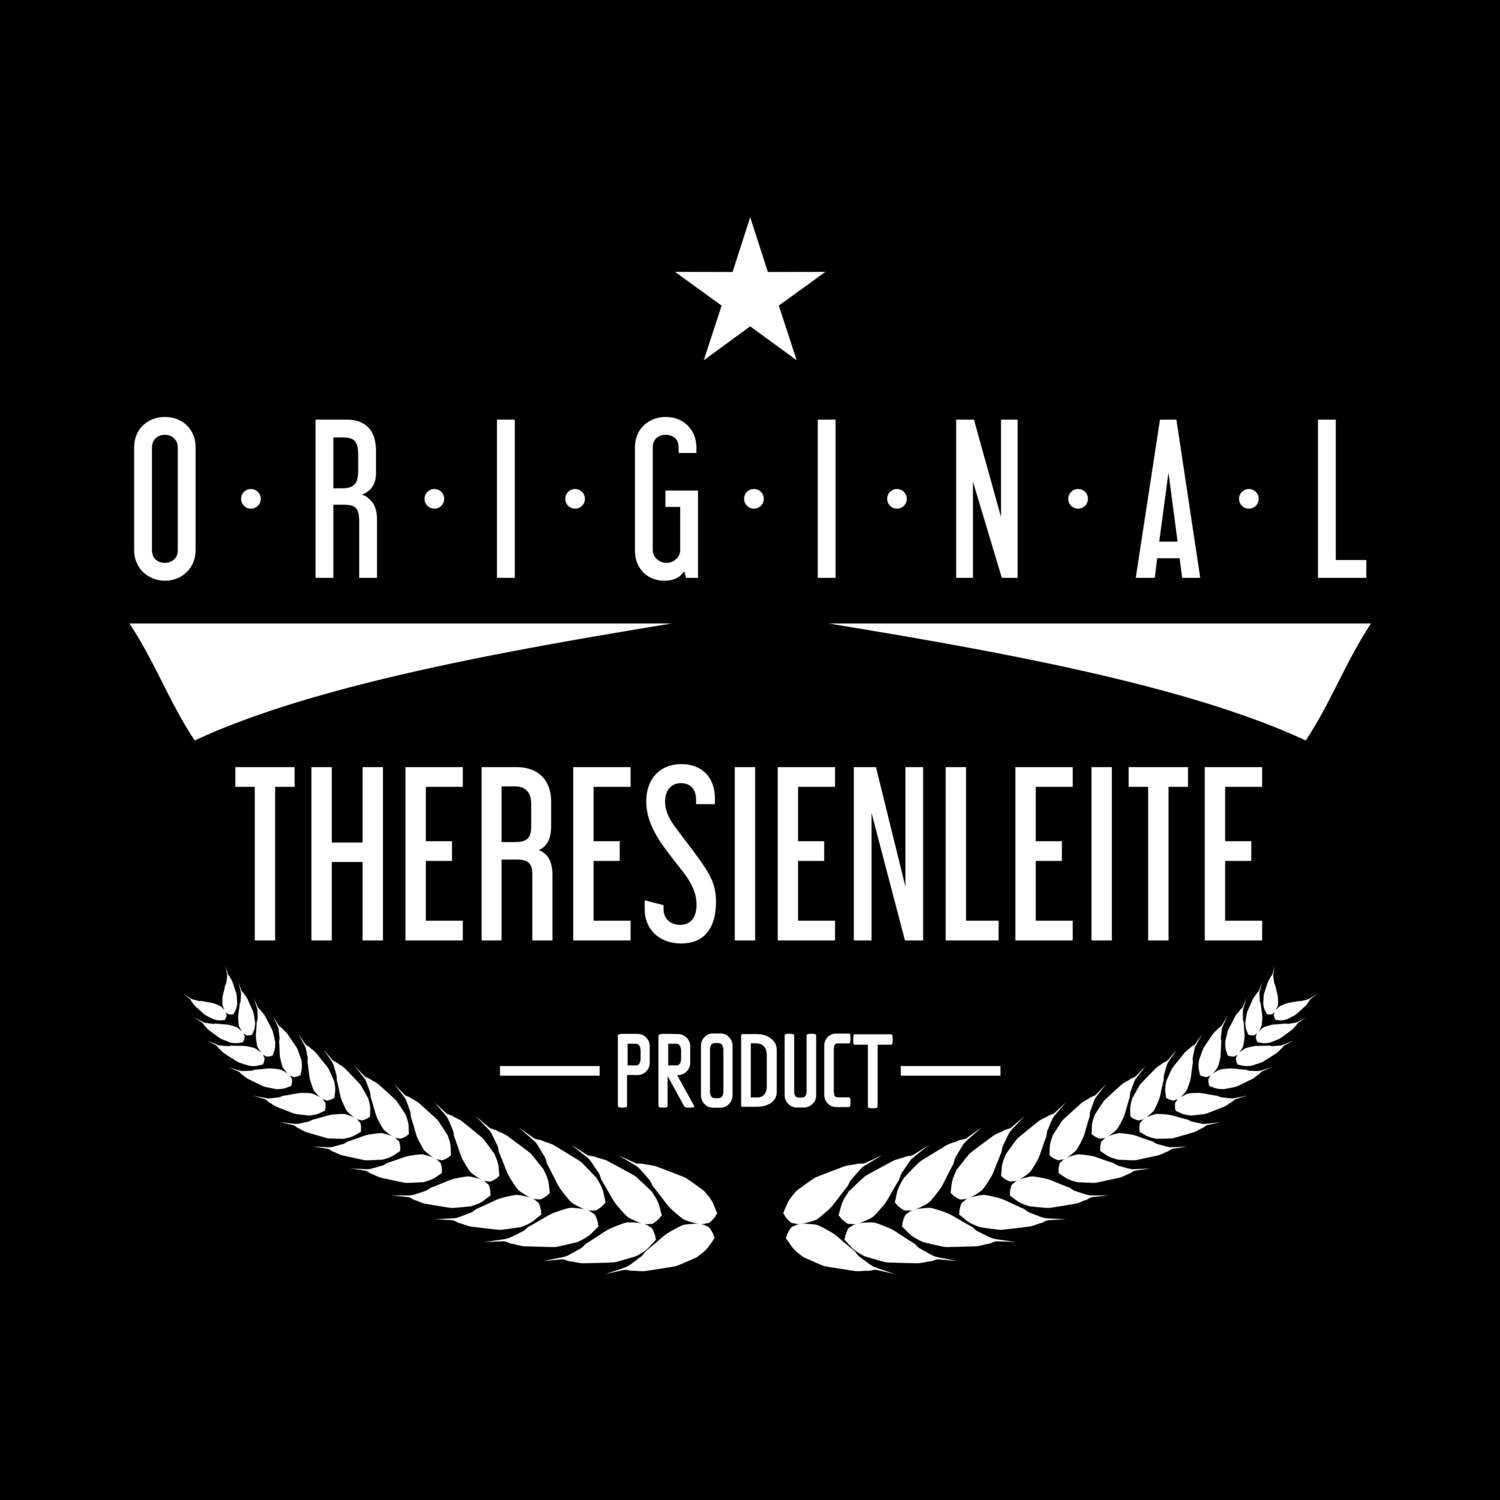 Theresienleite T-Shirt »Original Product«